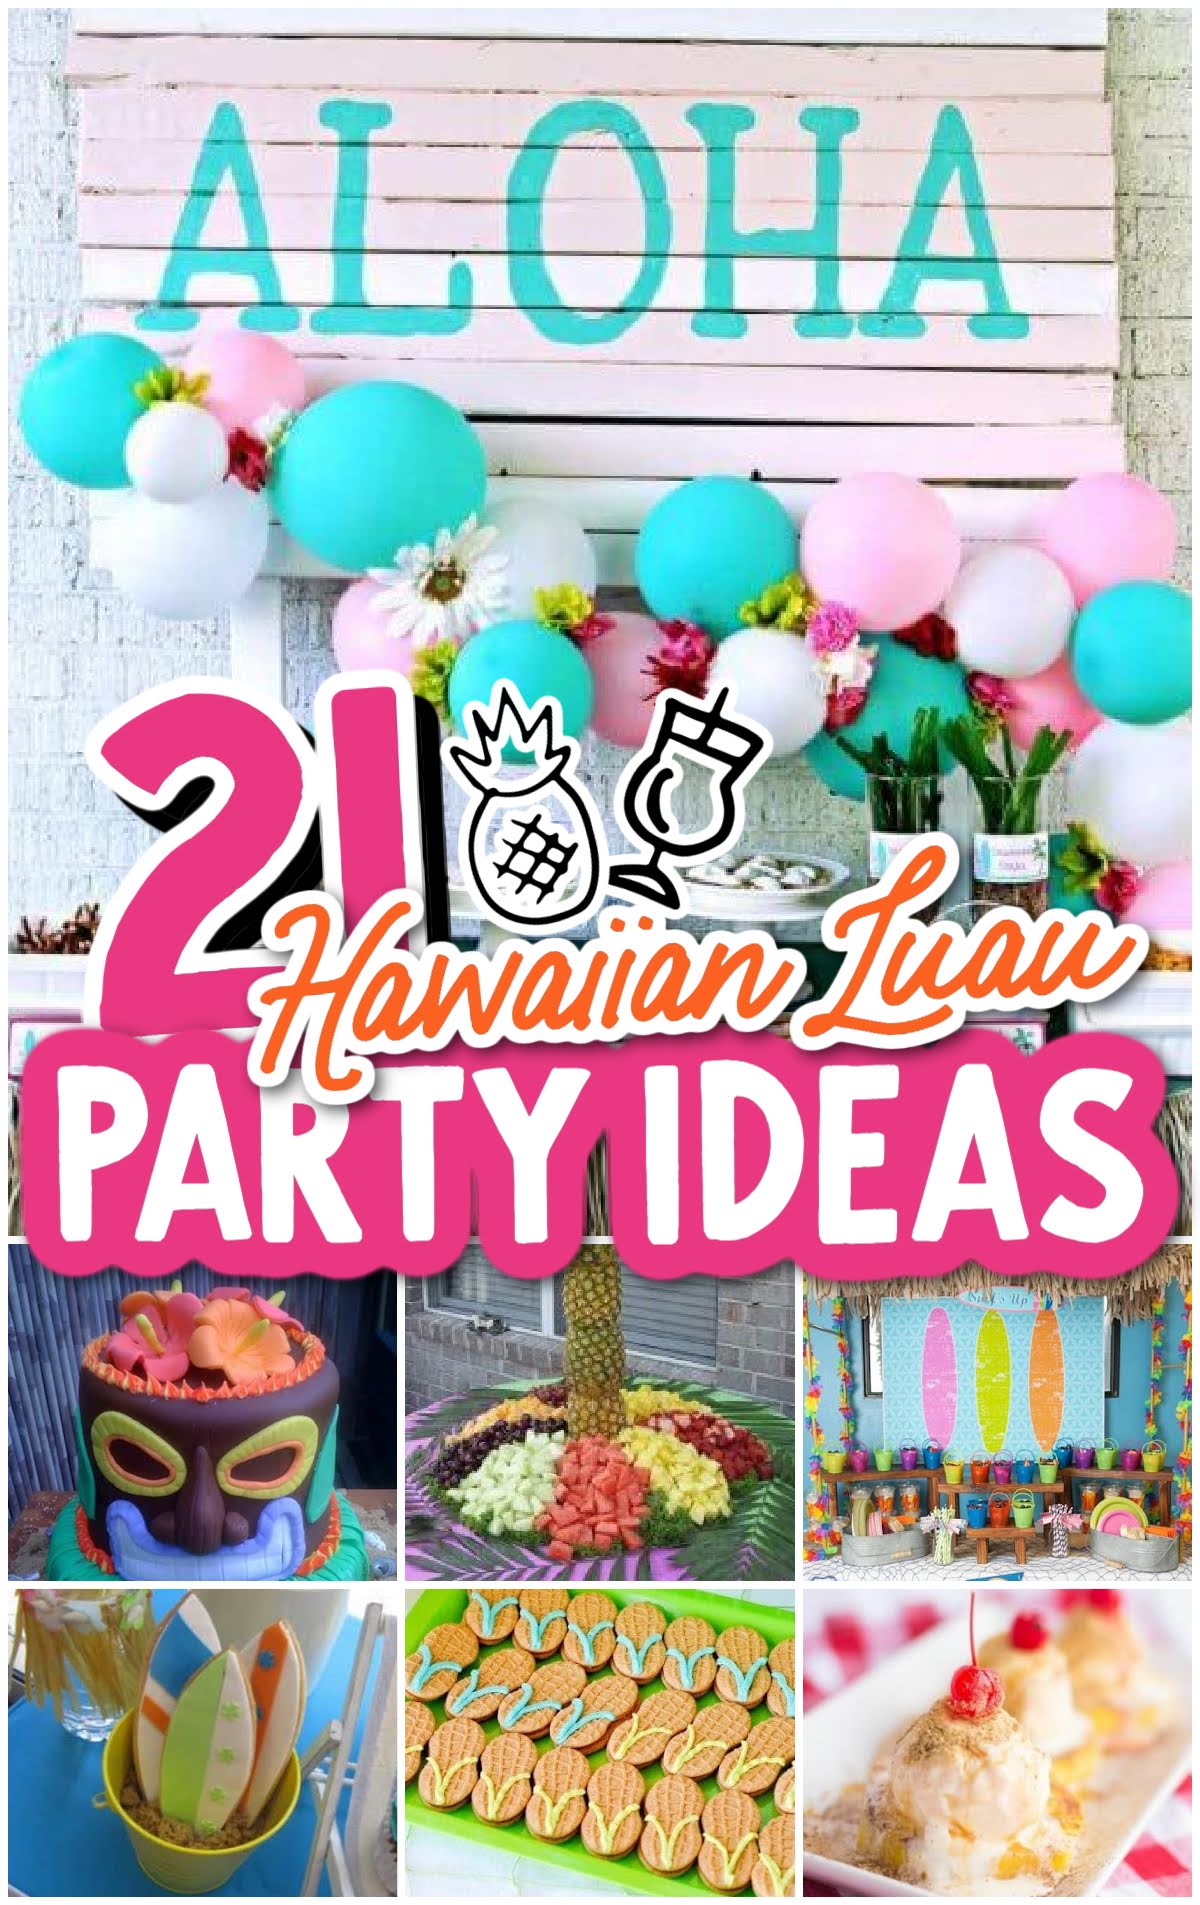 21 Hawaiian Theme Party Ideas (Luau Party) - Spaceships and Laser Beams